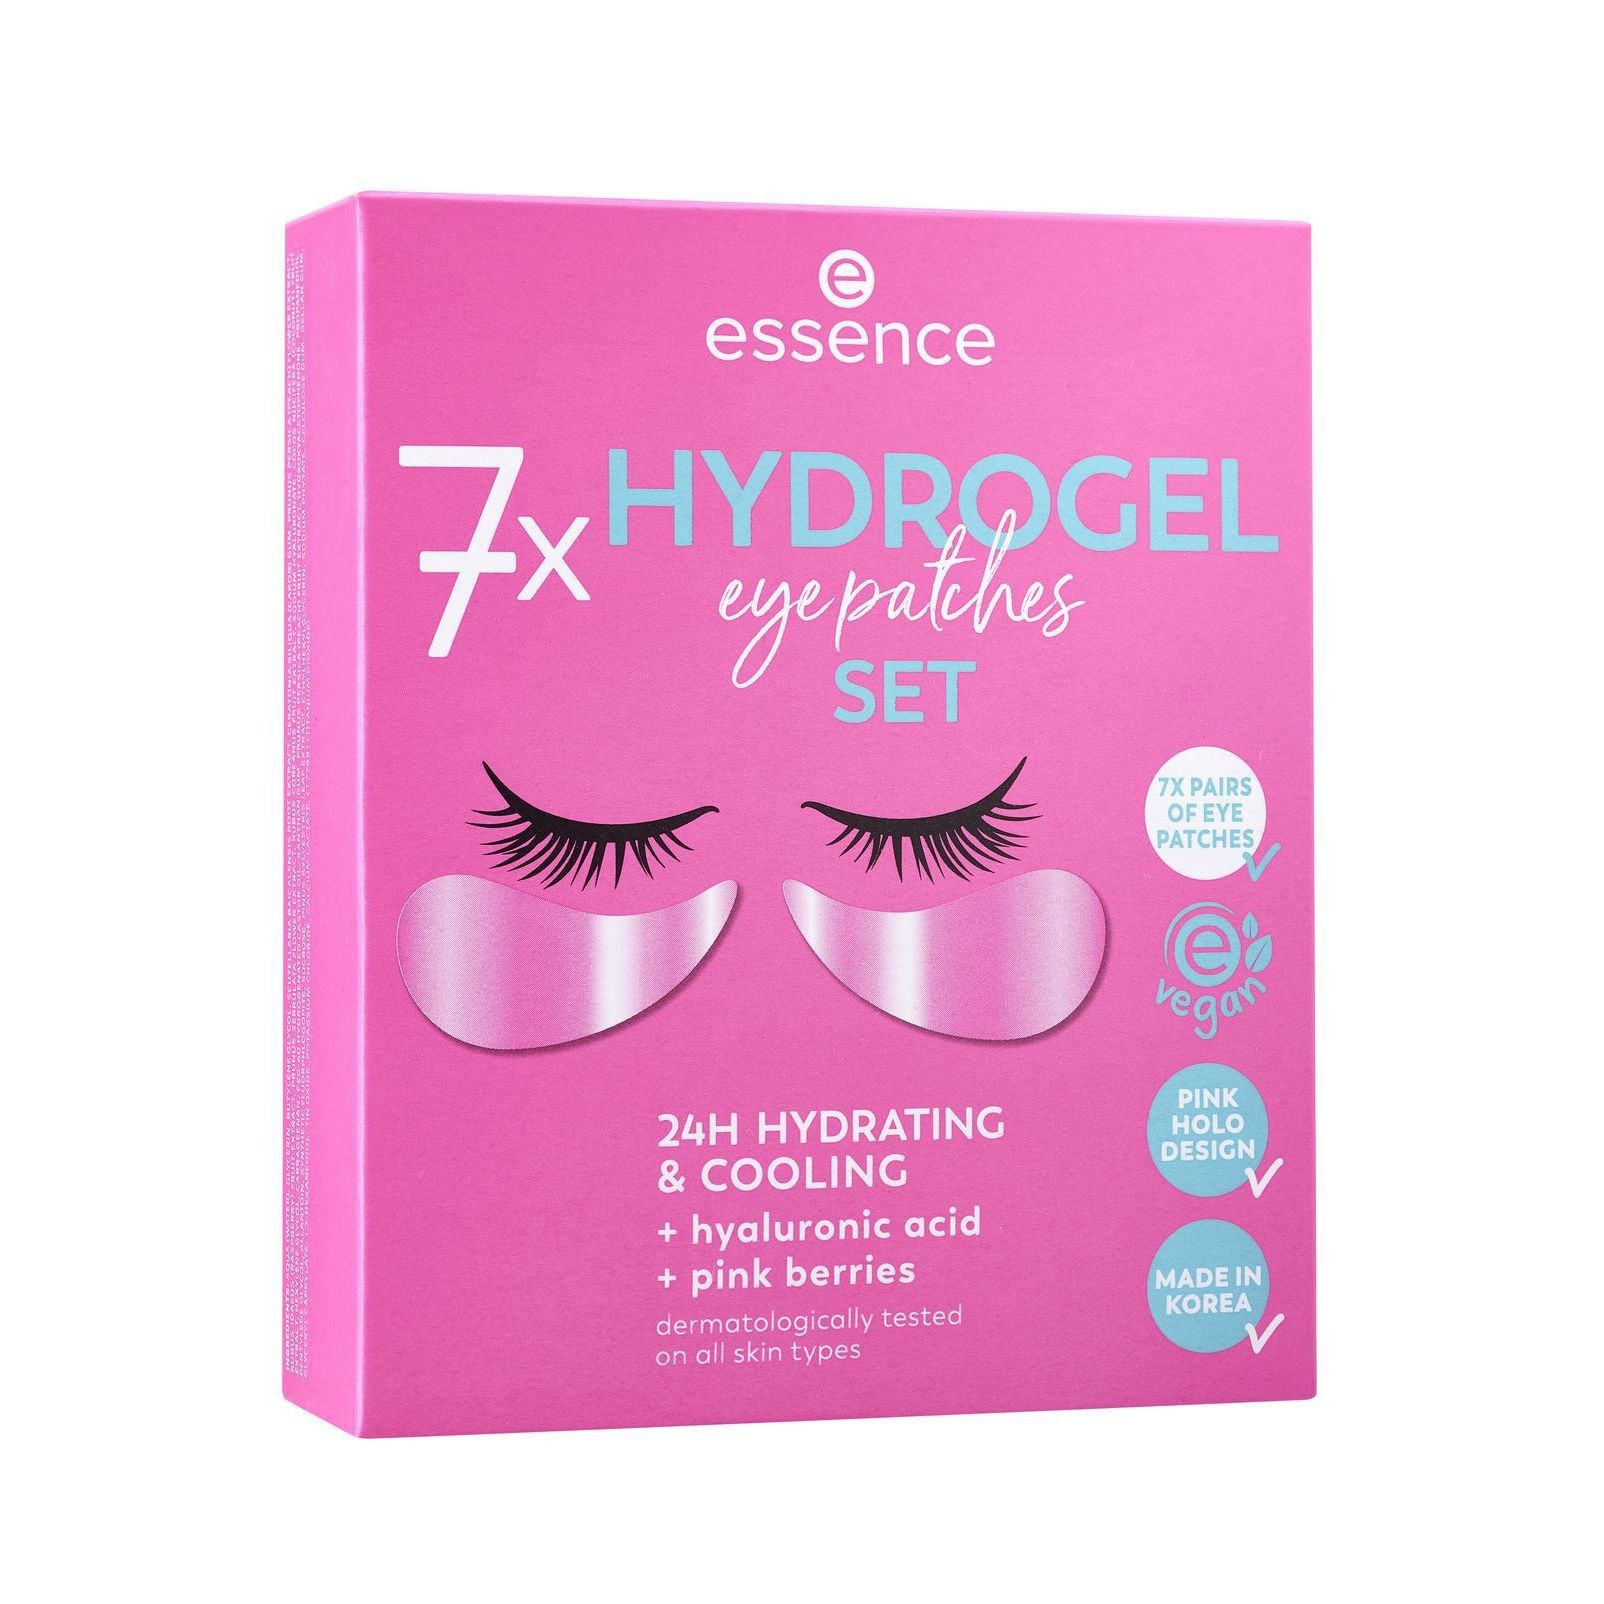 Hydrogel Eye Patches Set (7 Pairs)